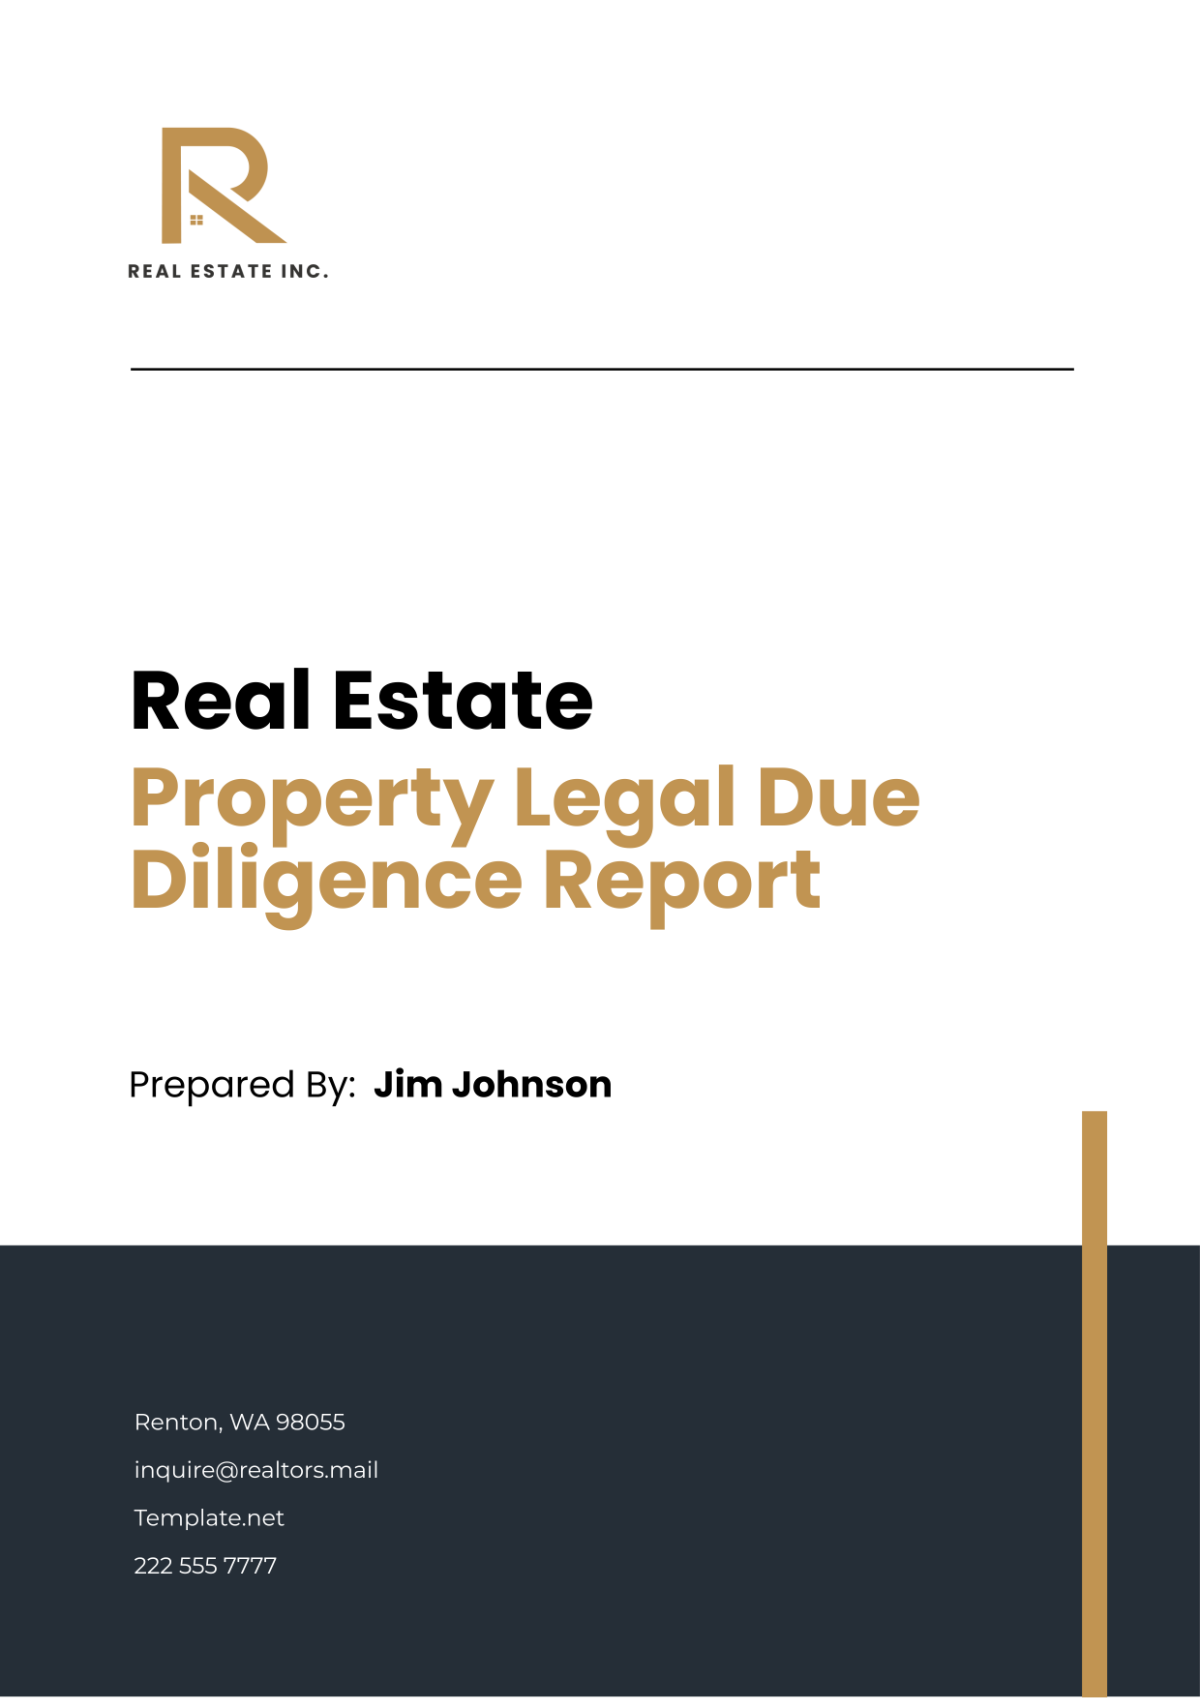 Free Real Estate Property Legal Due Diligence Report Template